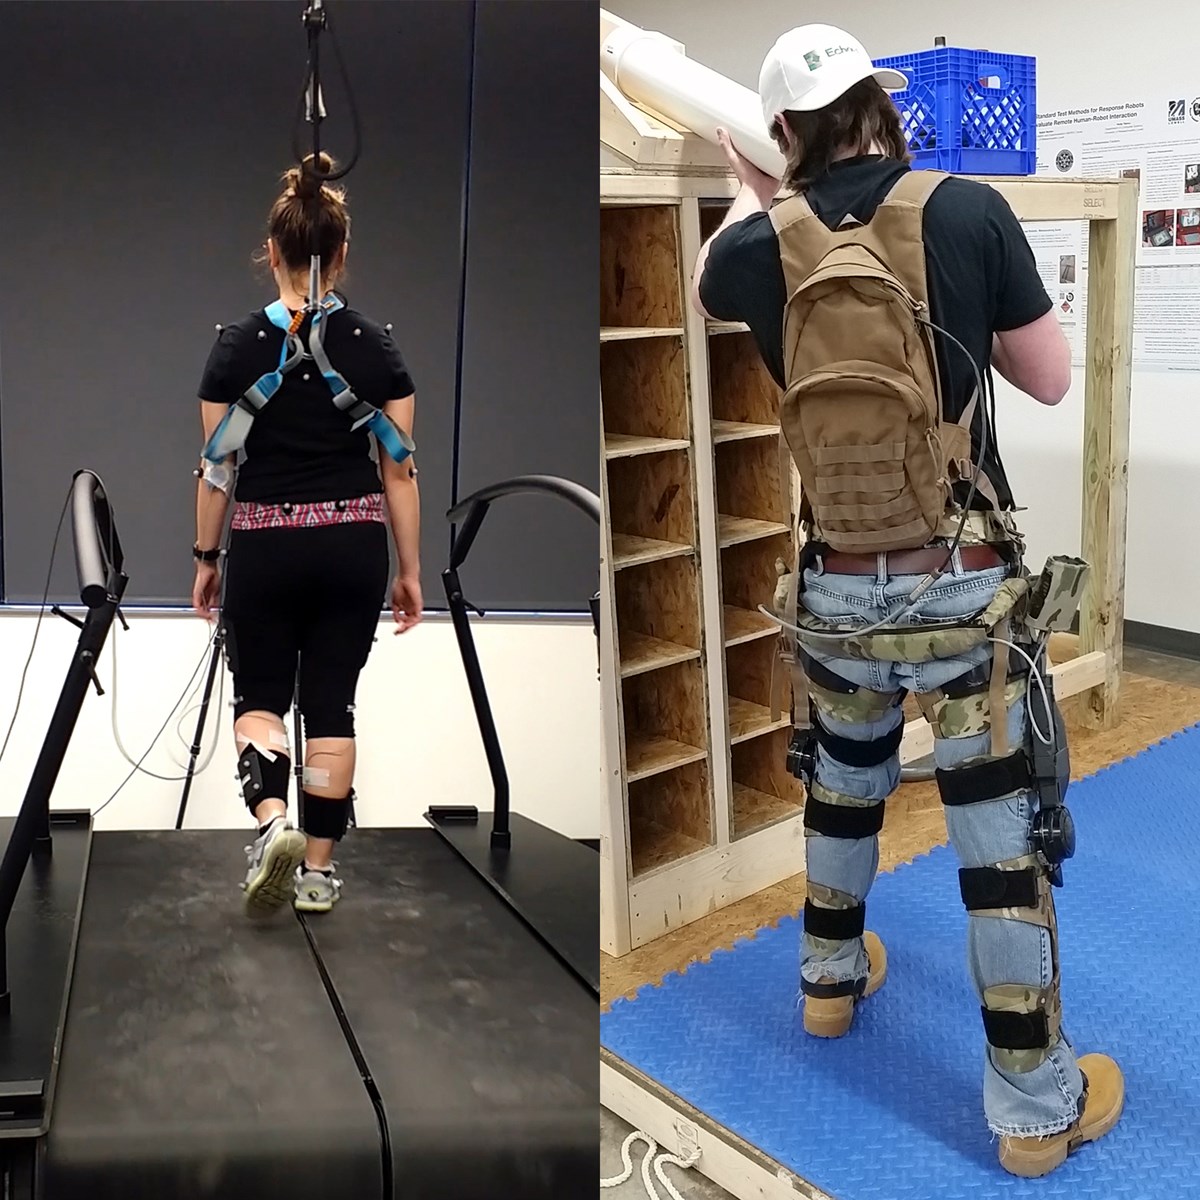 Person on treadmill with motion capture (left) and person wearing exoskeleton lifting munitions test artifact (right)